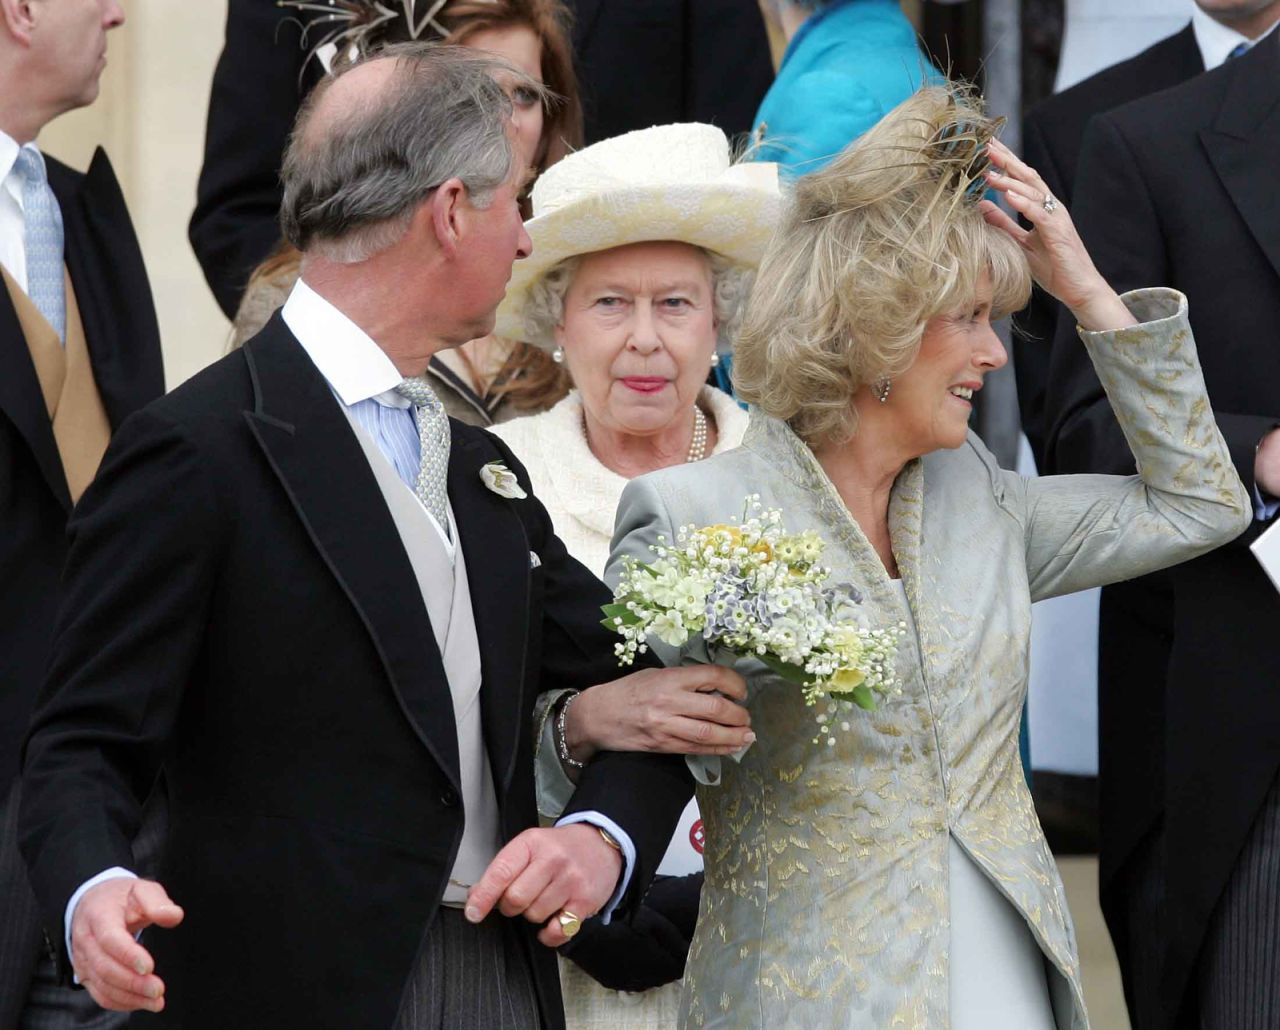 Prince Charles looks back at his mother after wedding Camilla, Duchess of Cornwall, in April 2005.